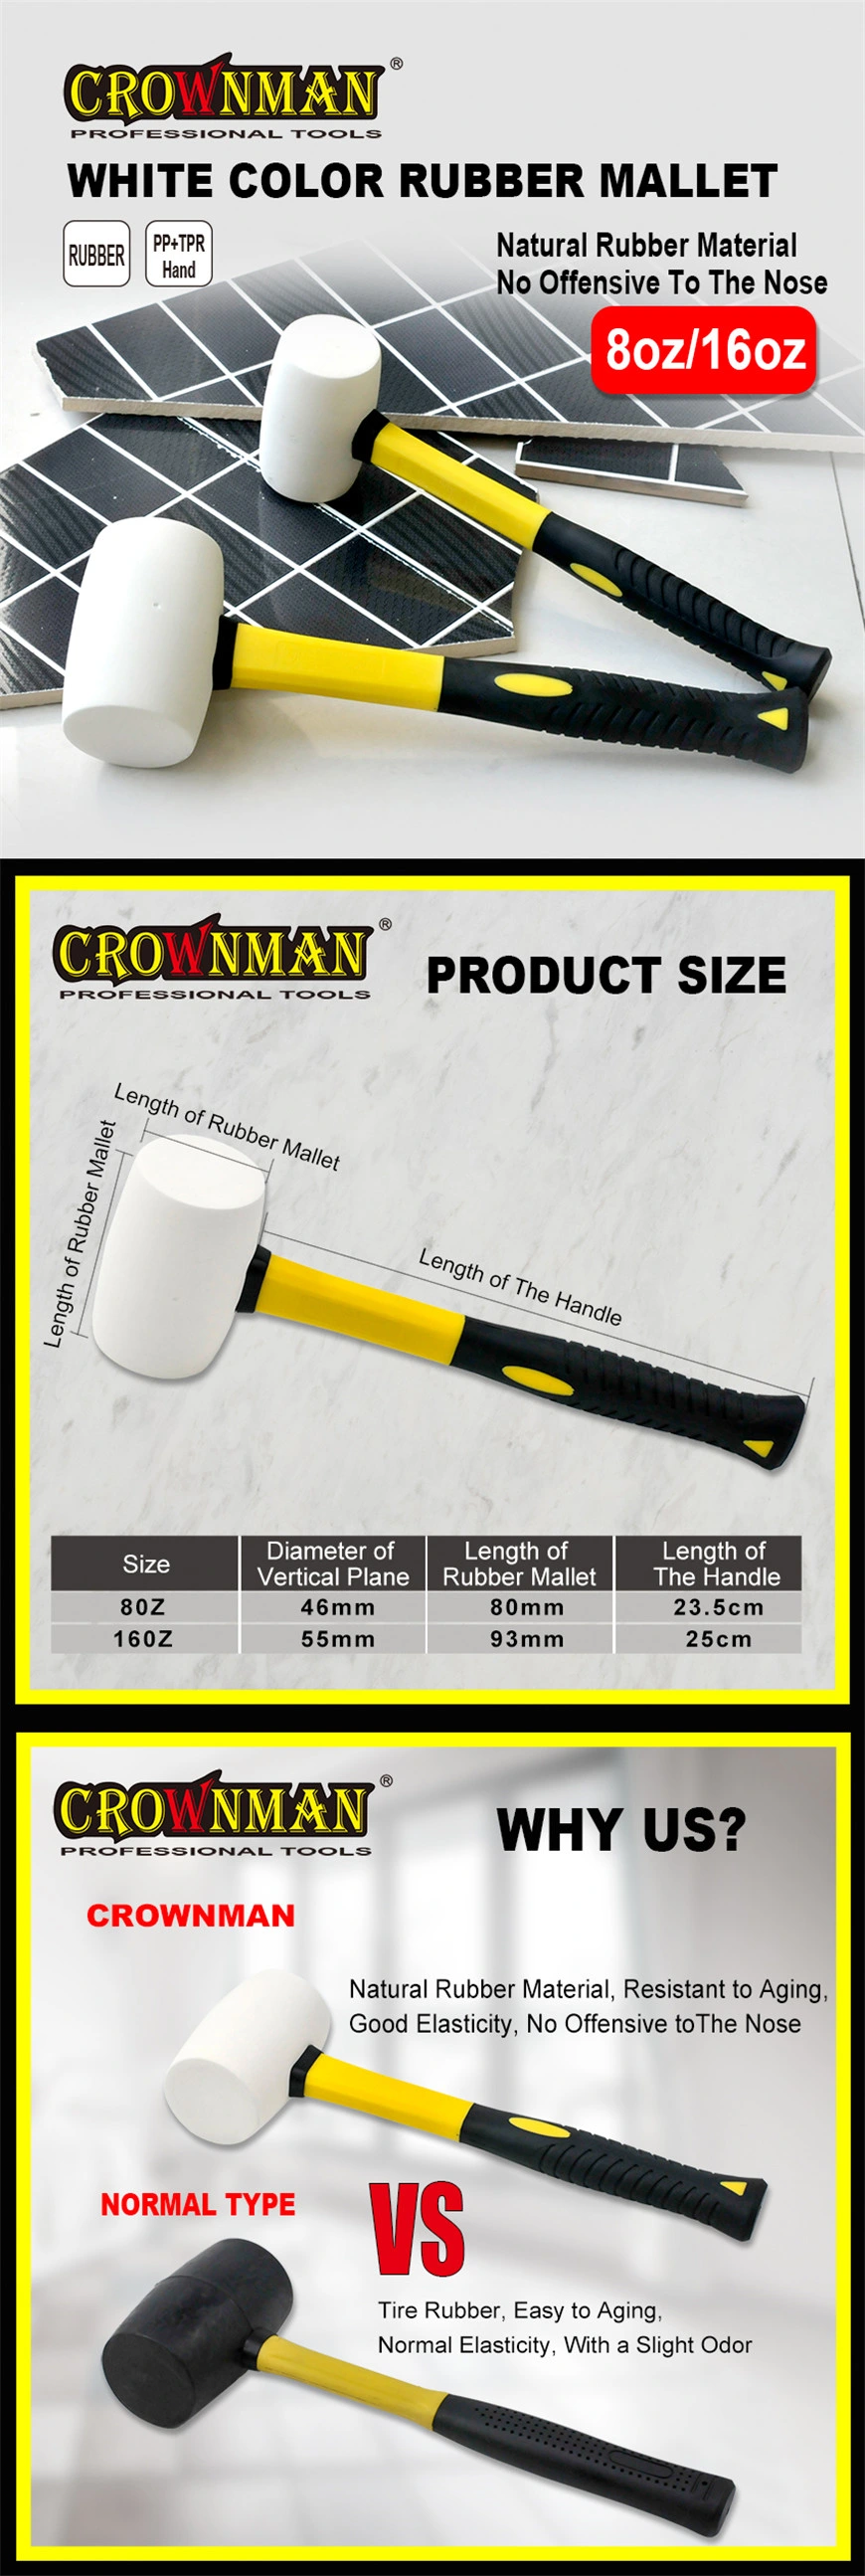 Crownman Industrial Grade White Color Rubber Mallet